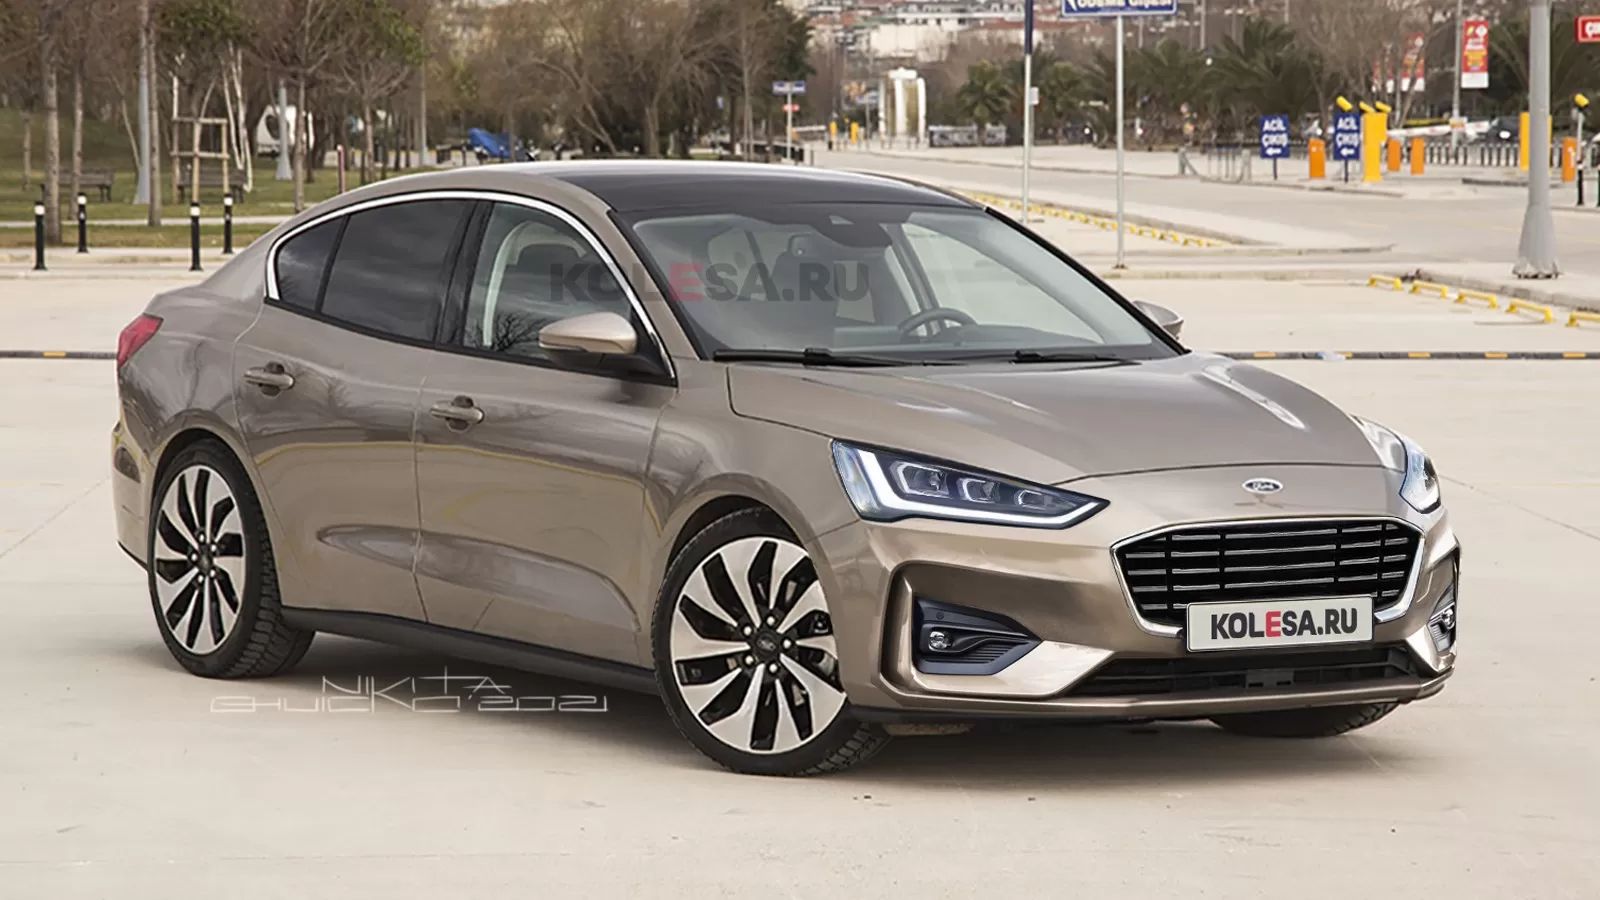 The Facelifted 2022 Ford Focus Sedan Could Look A Lot Like This Render